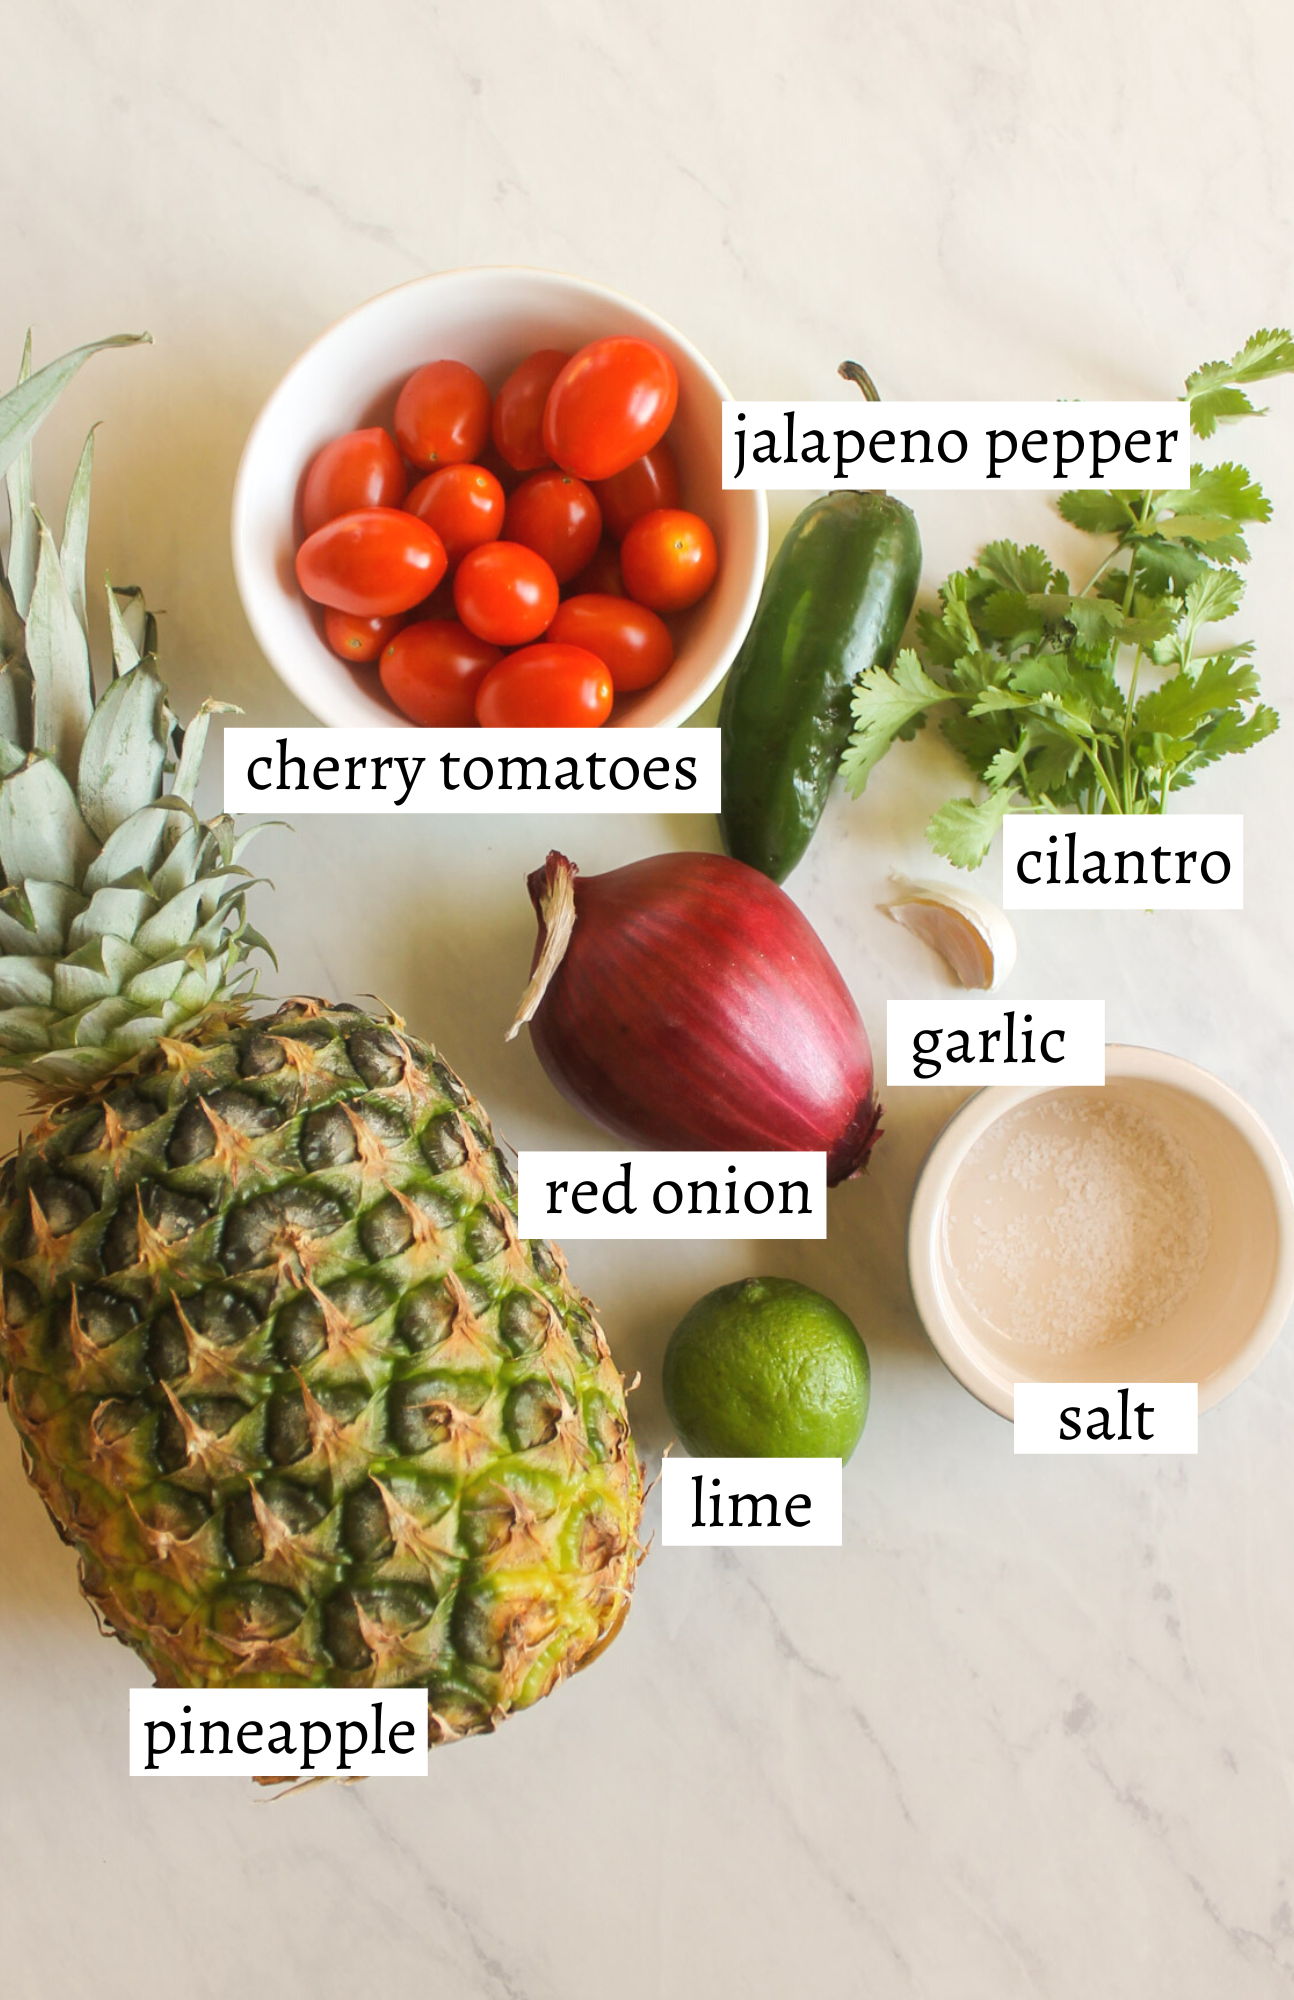 Labeled ingredients for pineapple pico de gallo.